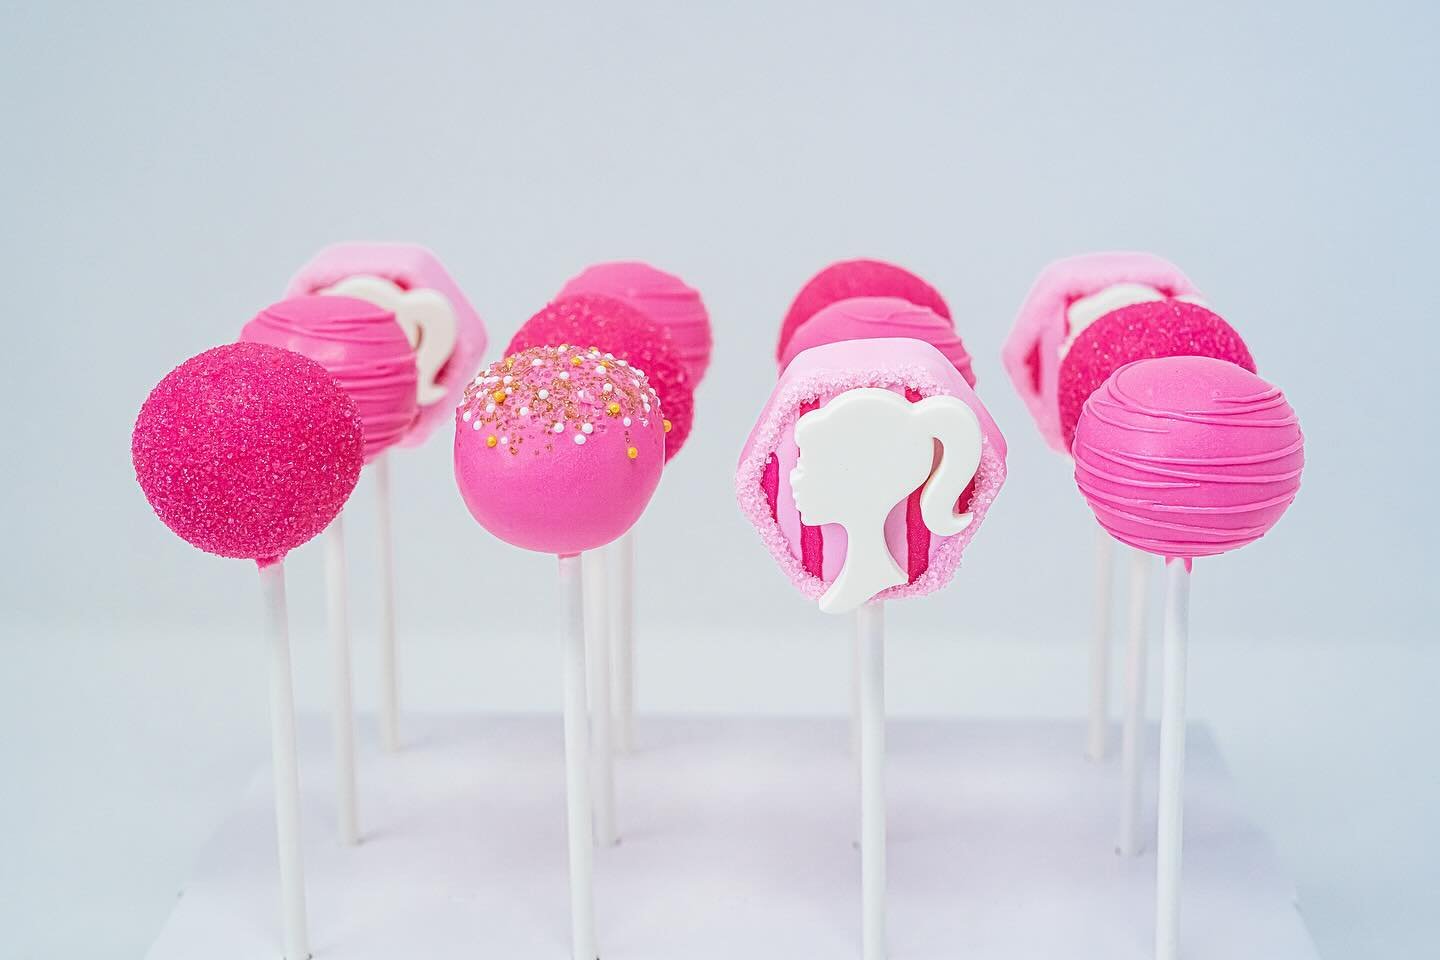 Turning four in Barbie style! 🎀✨ Celebrating with delicious Barbie-themed Cake Pops and all the pink glam!🍭🌸
~~~
#cakepops #katespoperella #cakepopsofinstagram #barbie 
#happybirthday #cakepop #homebaker #custom #sweet
#pink #bakery #sweettooth #b